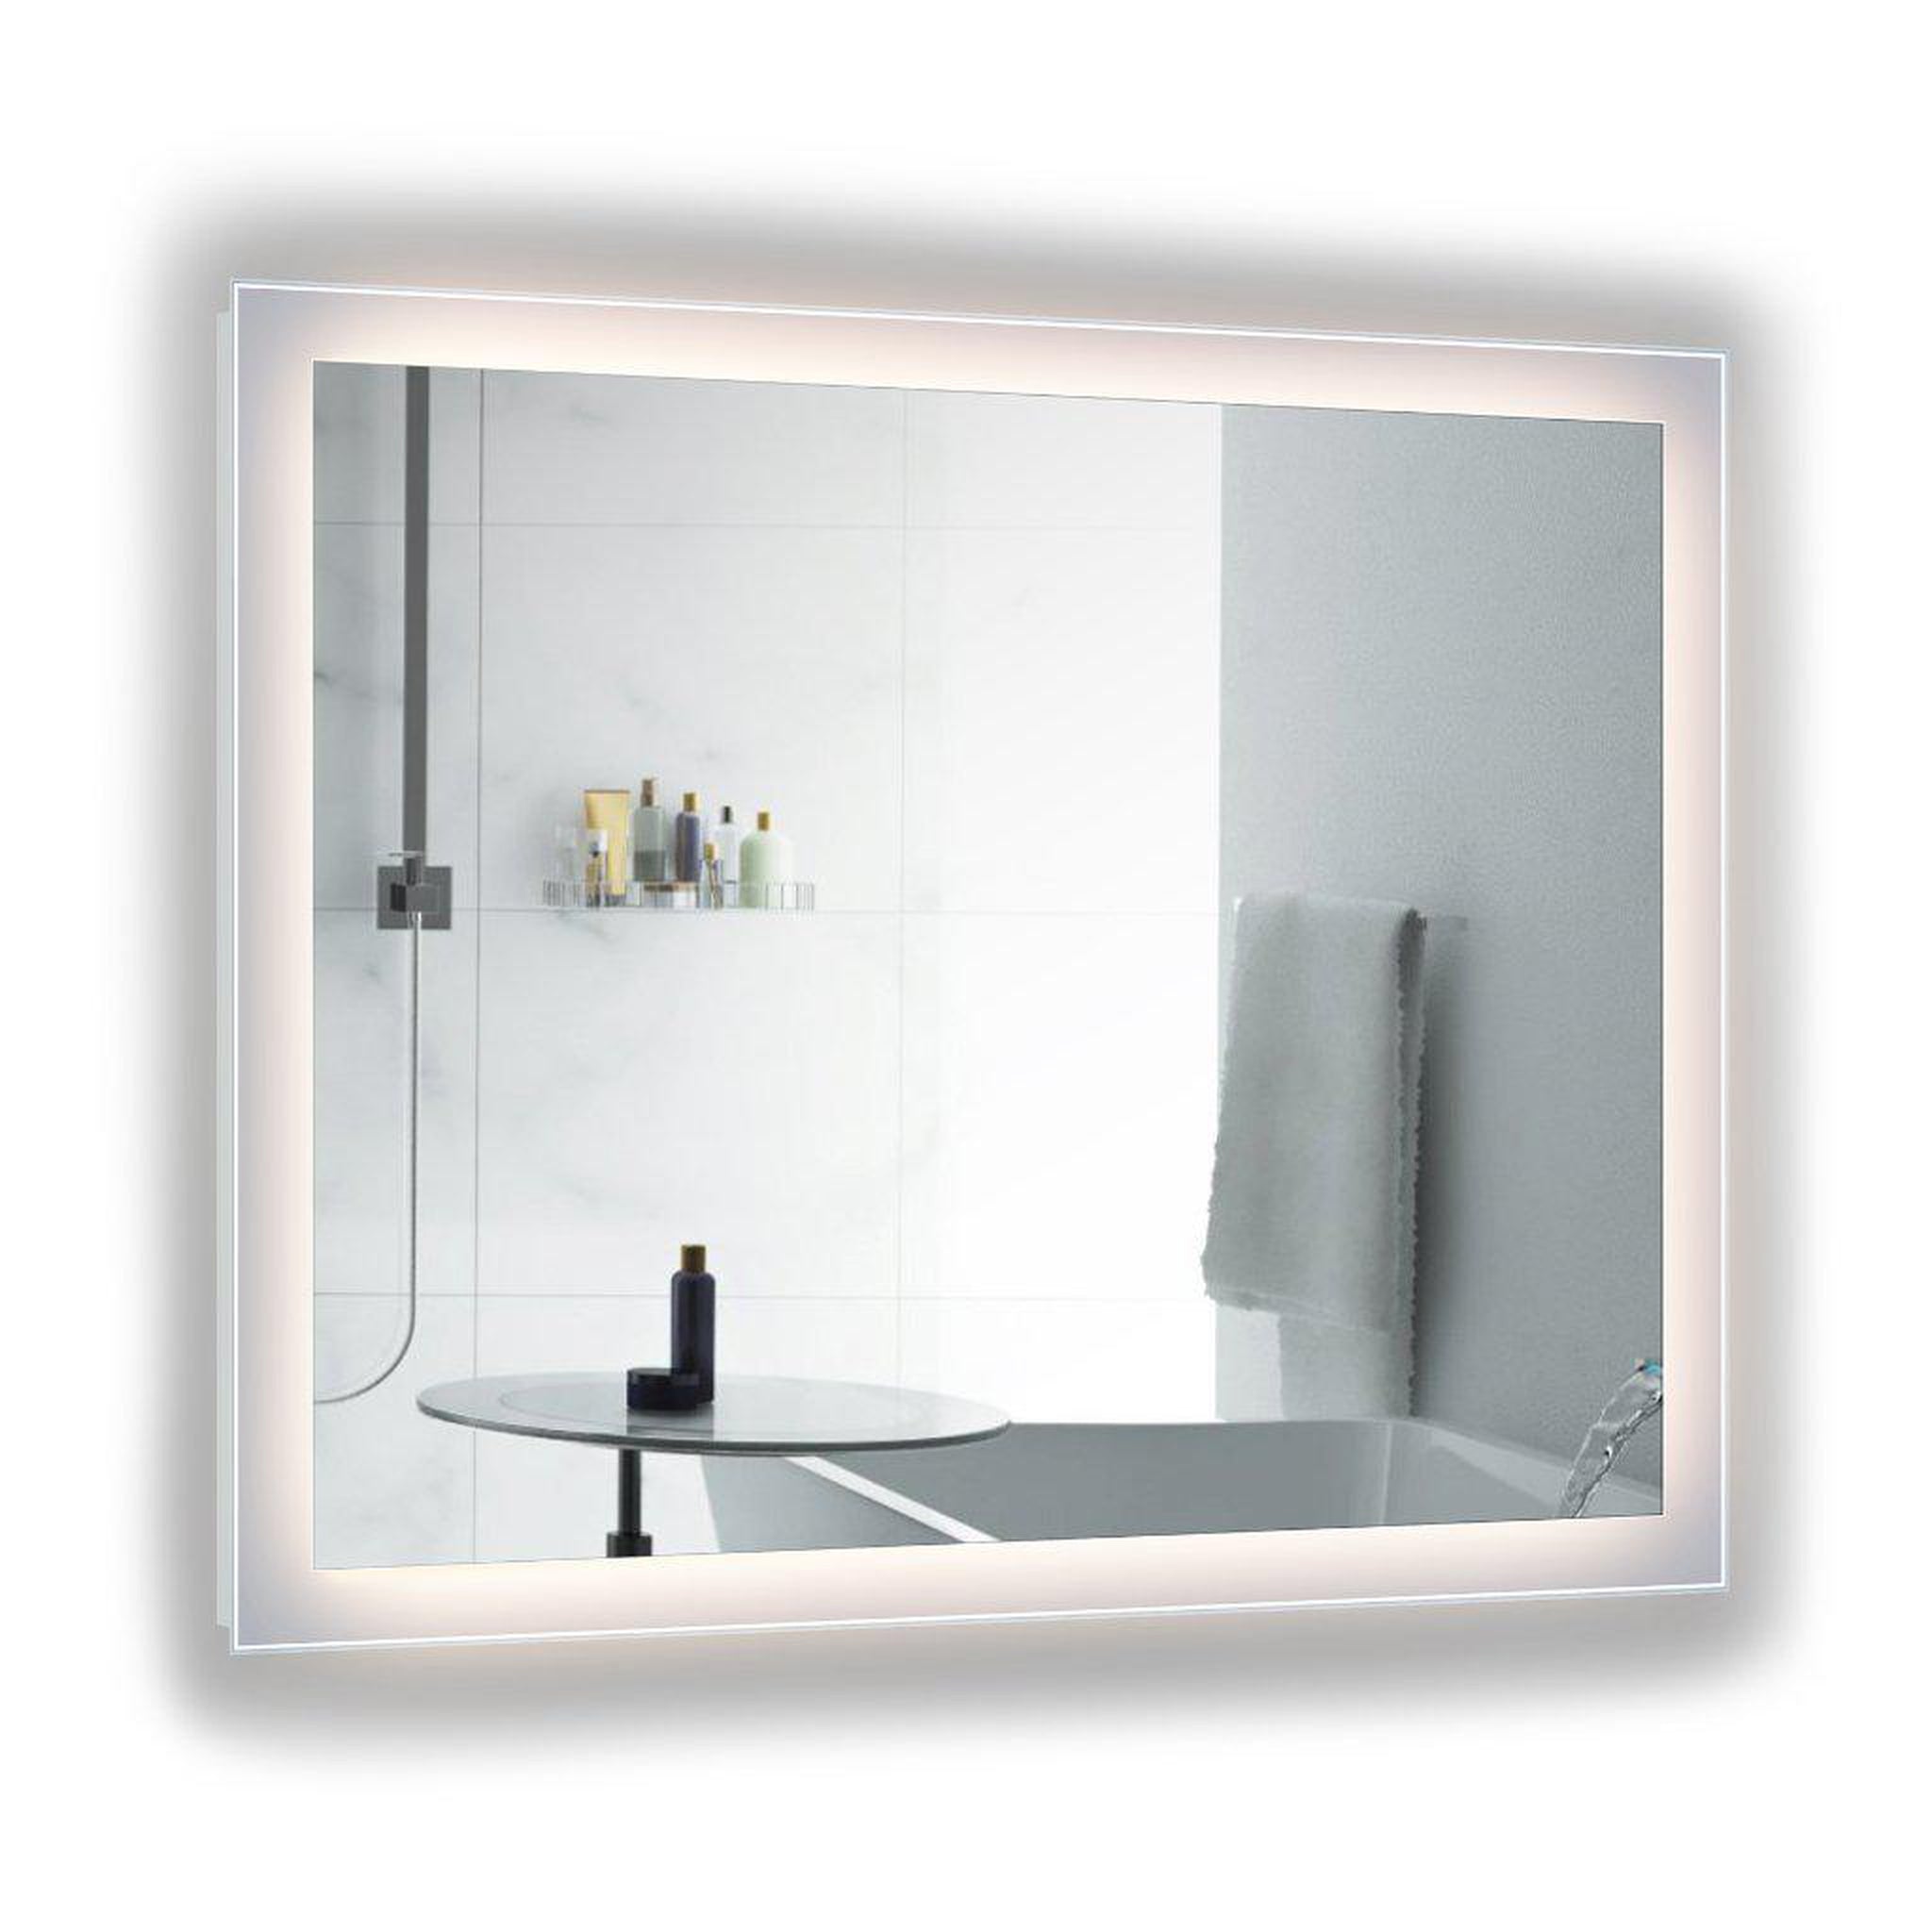 Krugg Reflections, Krugg Reflections Stella 48" x 36" 5000K Rectangular Wall-Mounted Silver-Backed LED Bathroom Vanity Mirror With Built-in Defogger and Dimmer